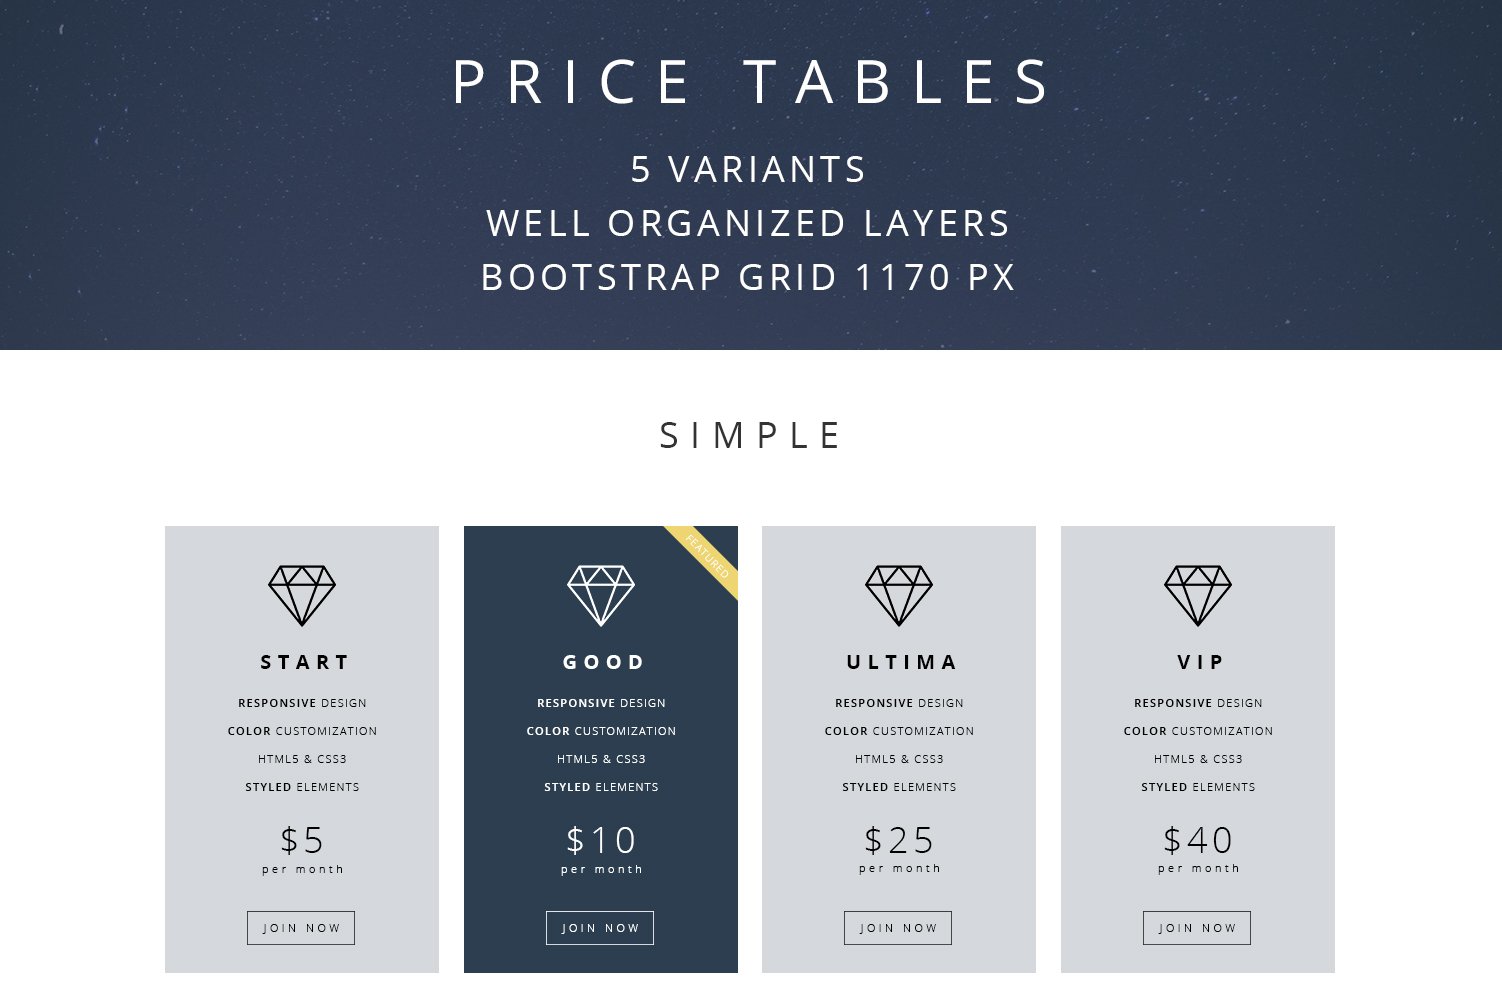 Simple Pricing Tables cover image.